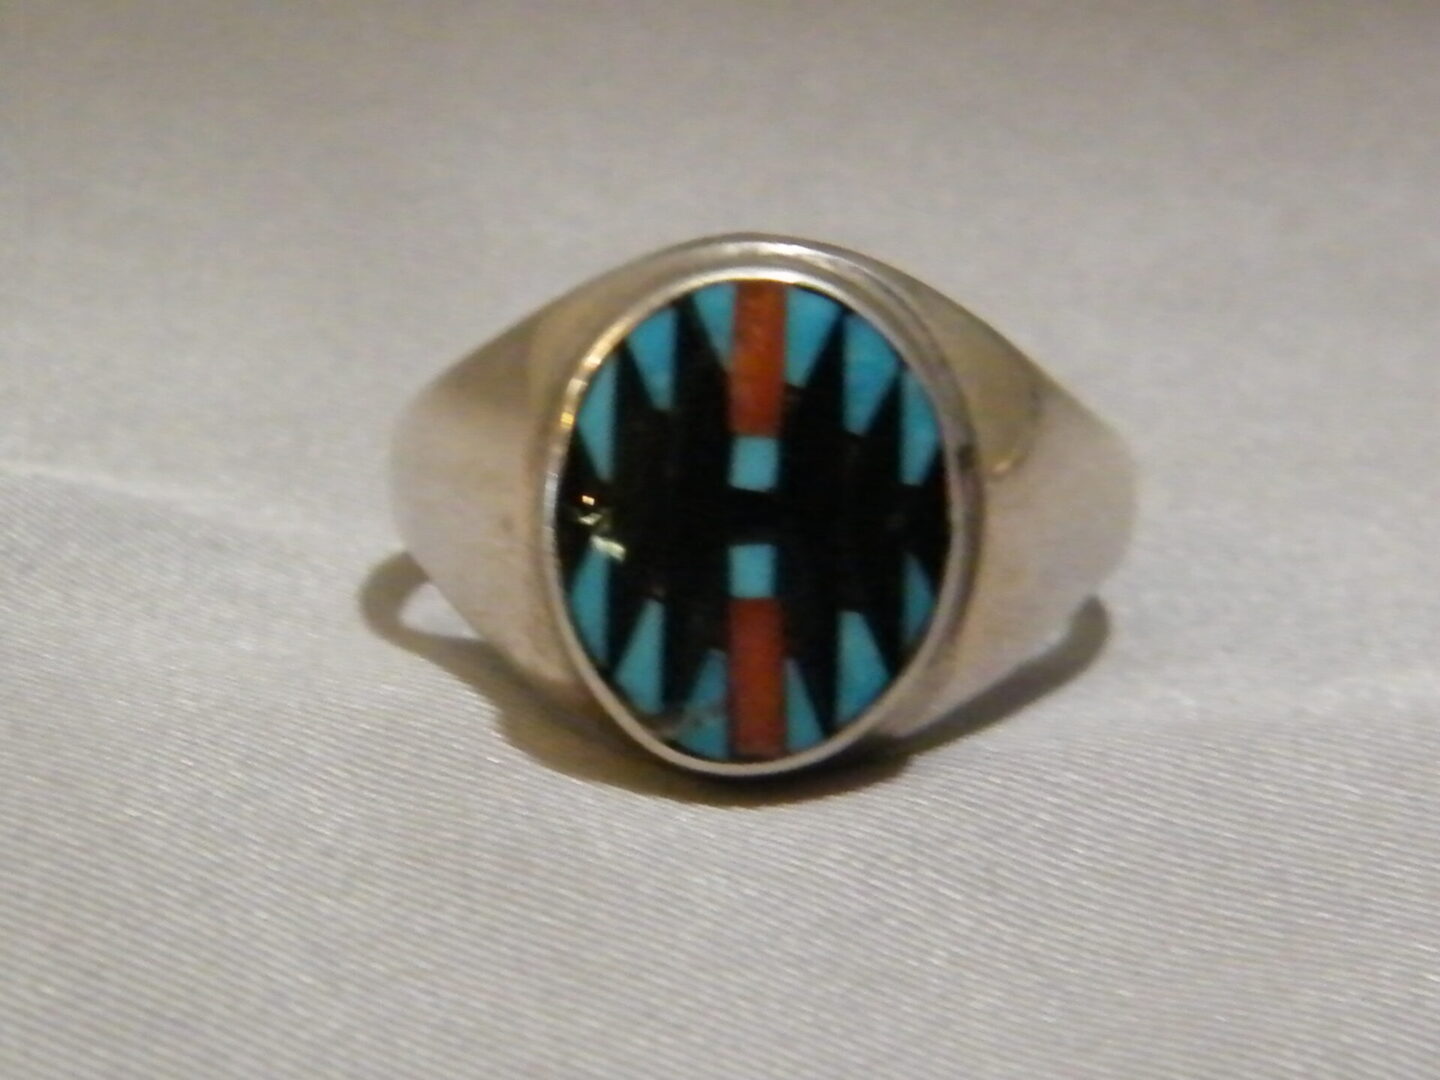 Oval Shaped Ring With Black Stone and Blue and Red Details